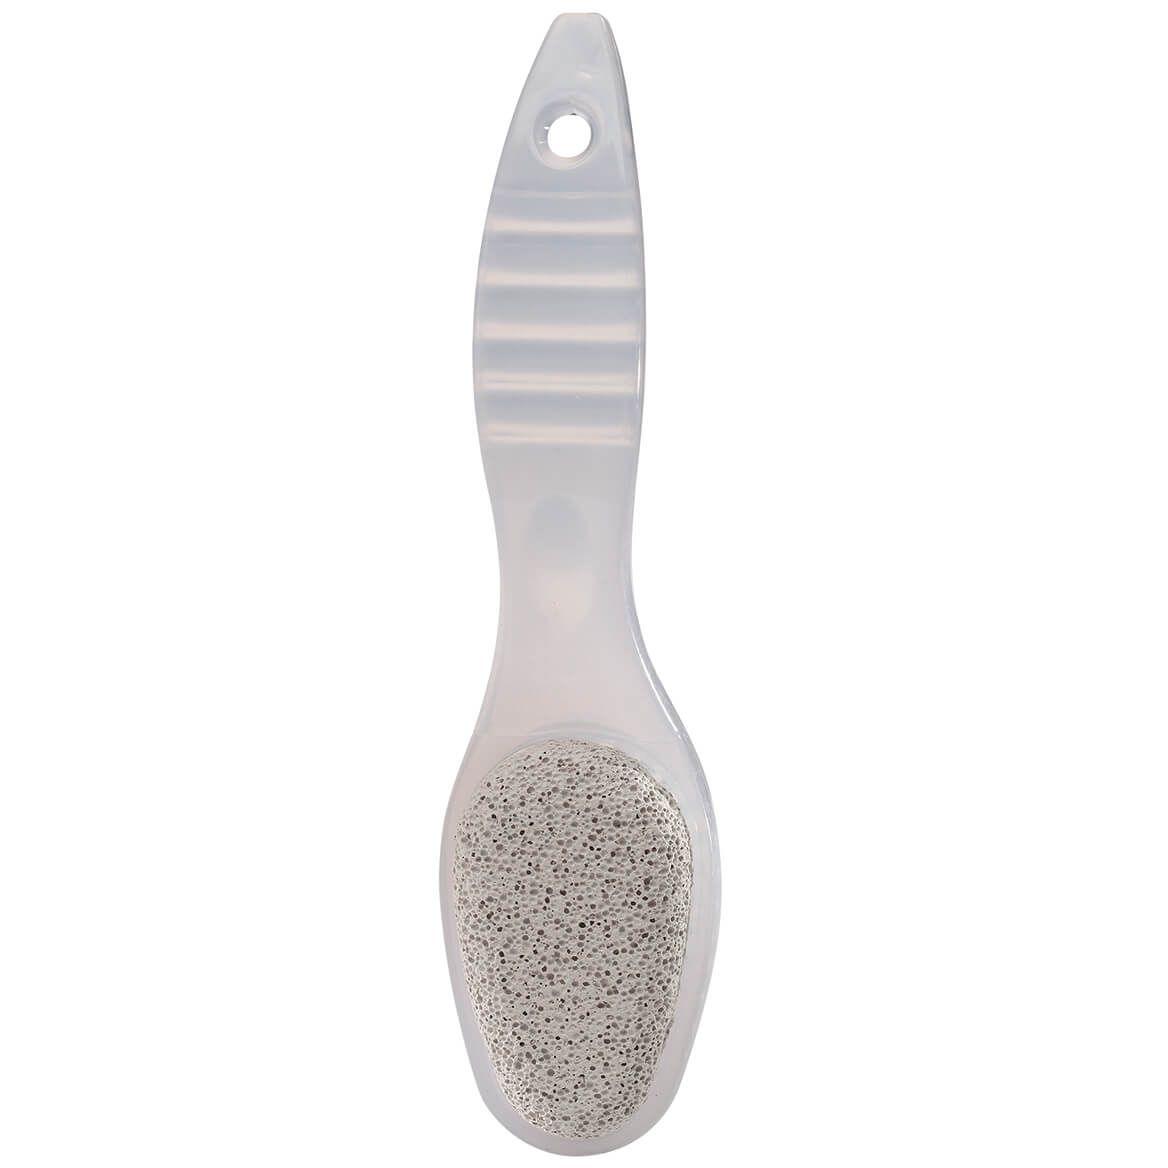 2 in 1 Pumice Stone and Brush Foot File + '-' + 376210